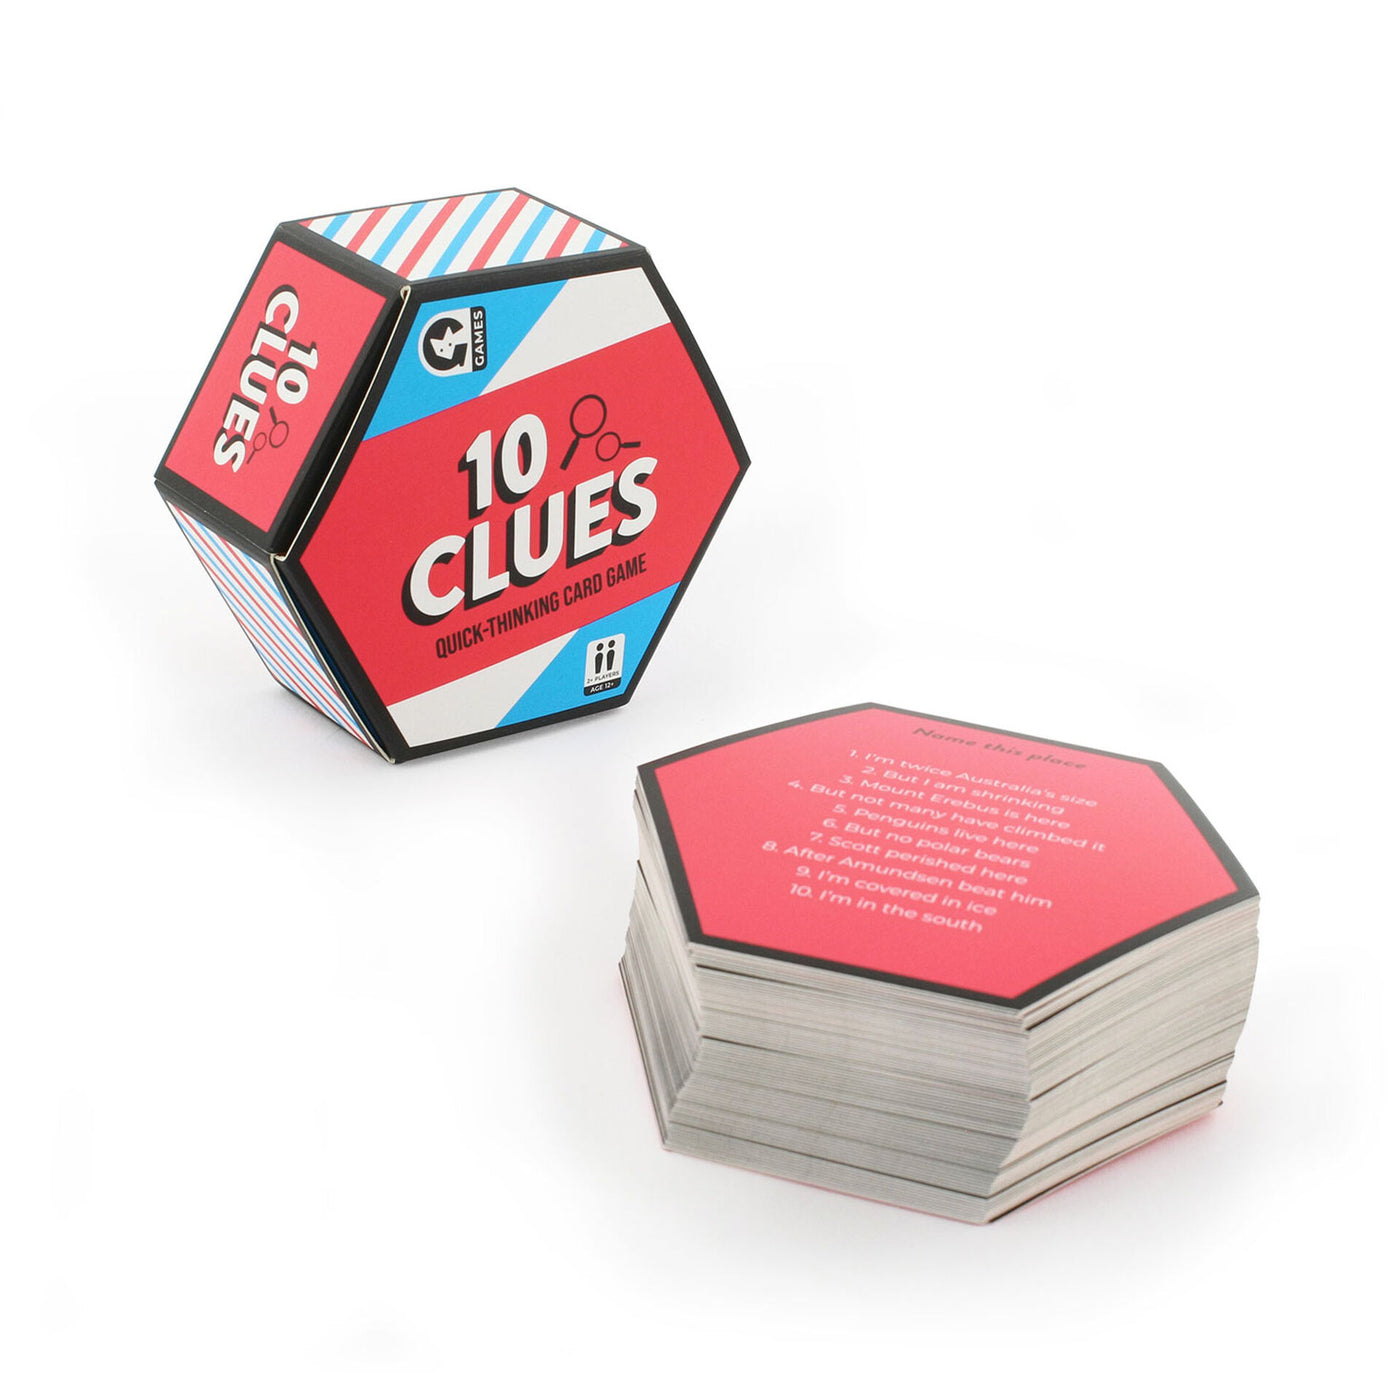 10 Clues Quick-Thinking Card Game